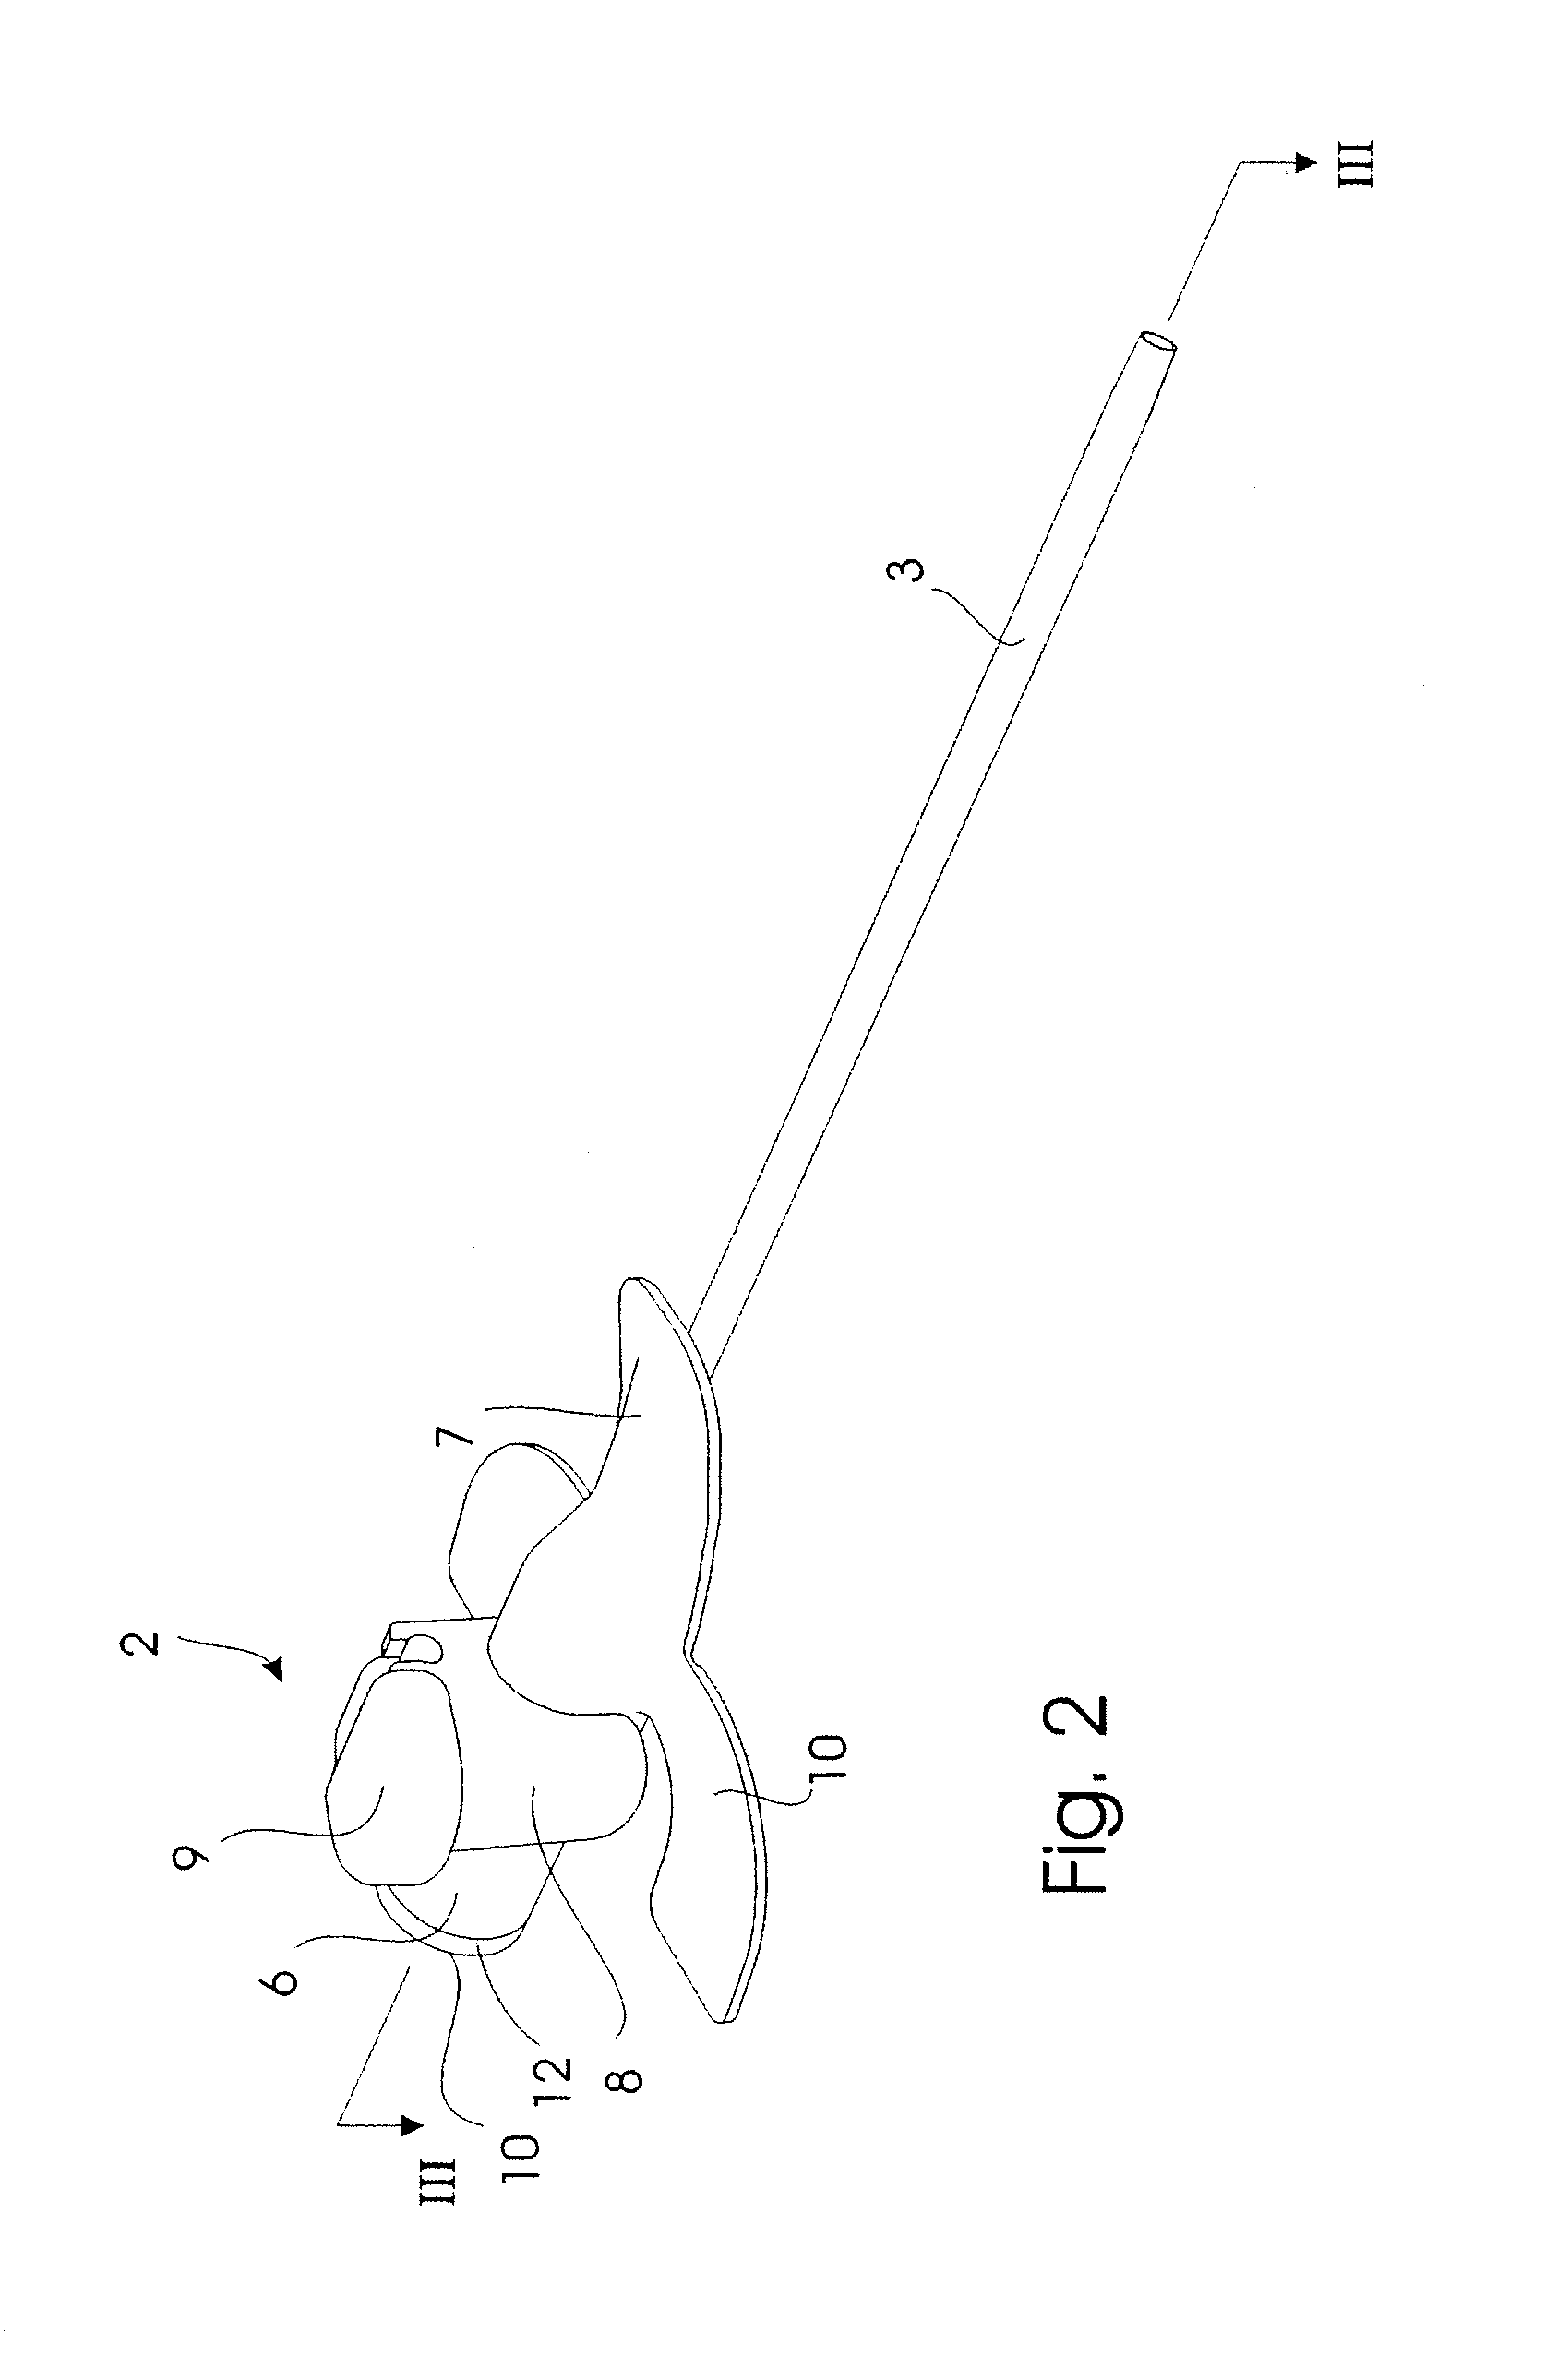 Peripheral catheter assembly and method of using it